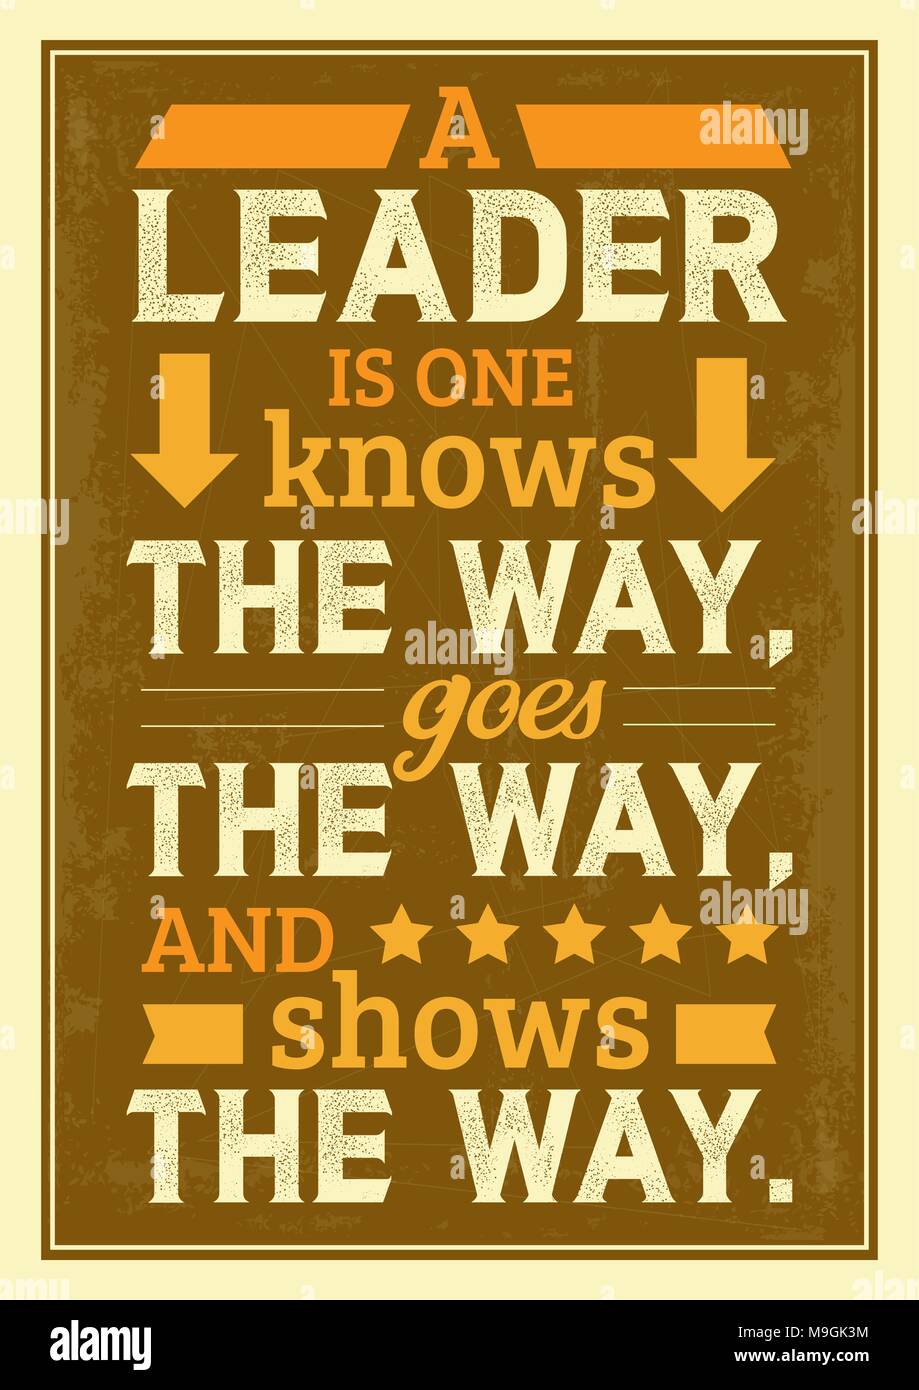 A leader is one knows, goes, shows the way quote Stock Vector